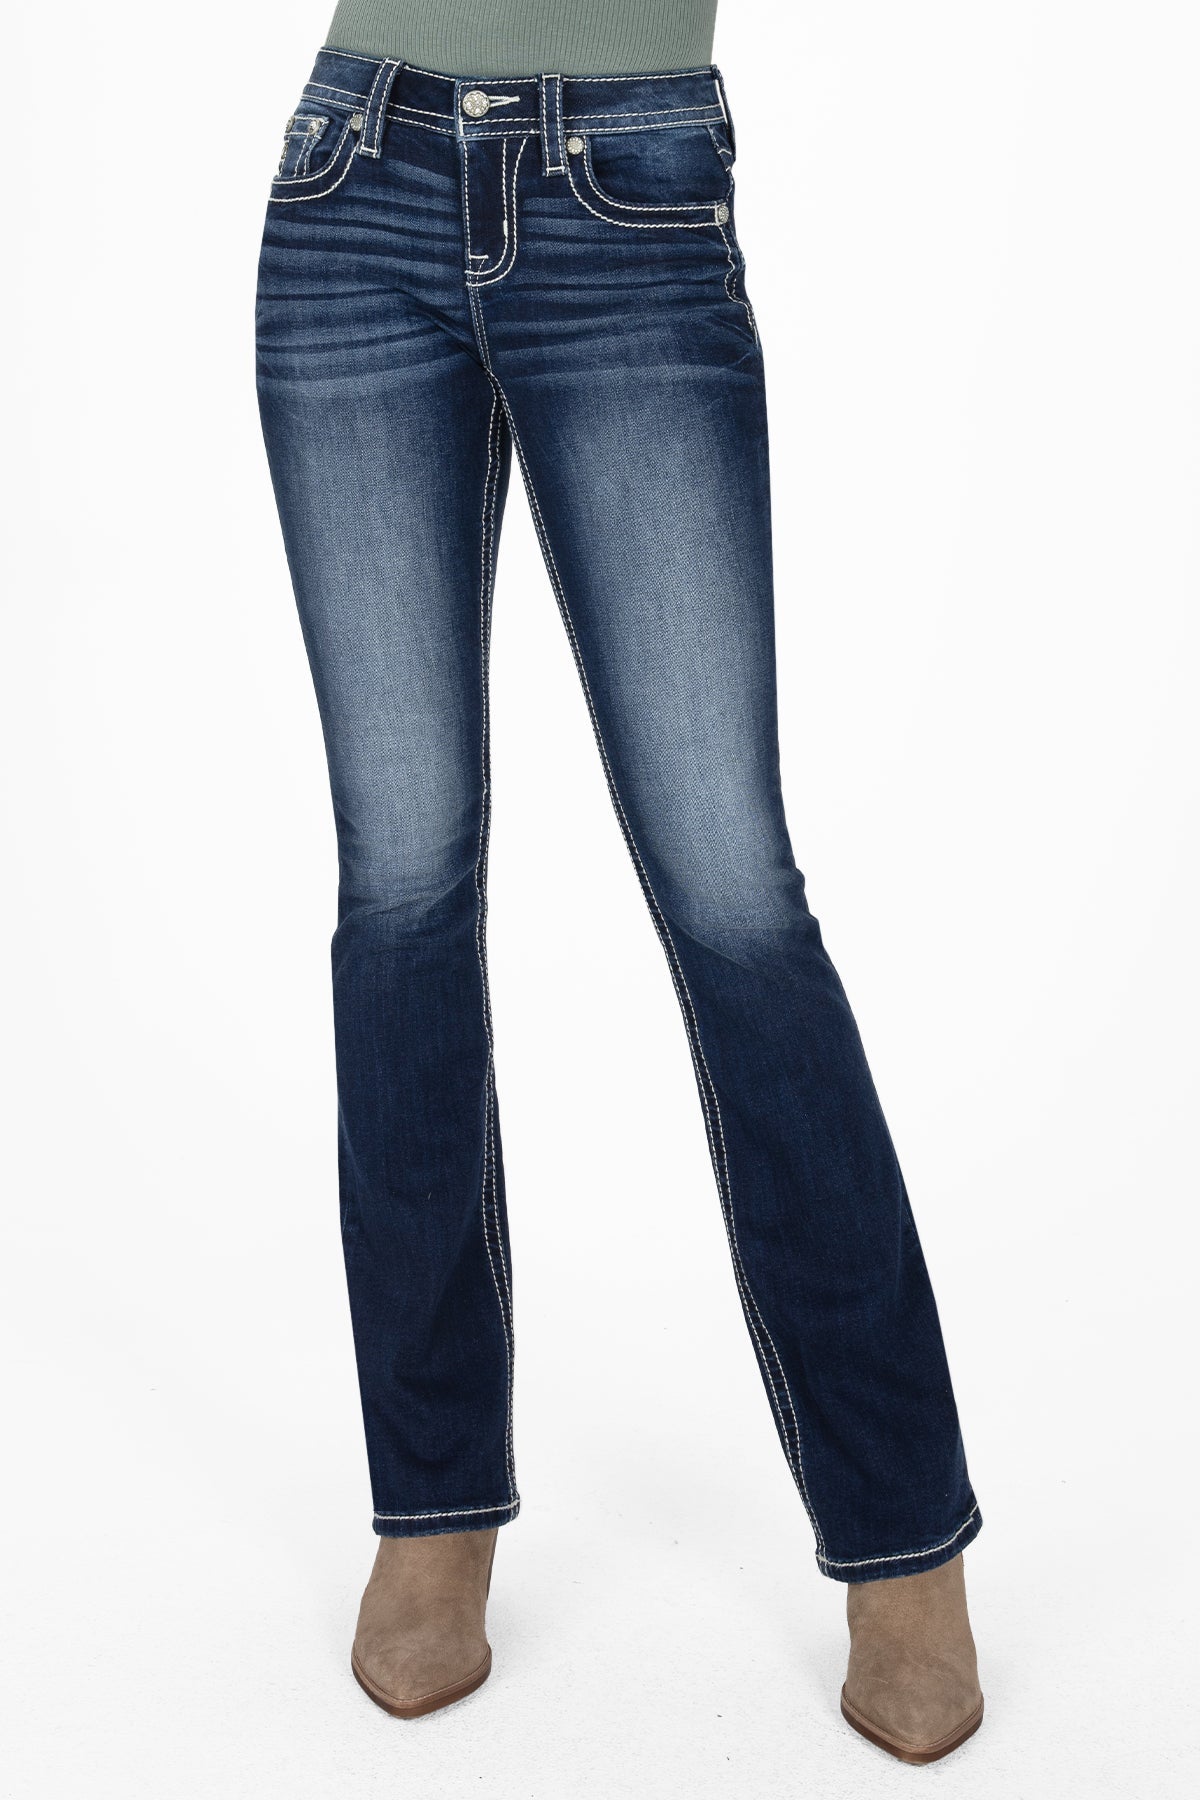 Miss Me Women's Rope & Boots Bootcut Jeans (M9196B-D1027 / Dark Wash)